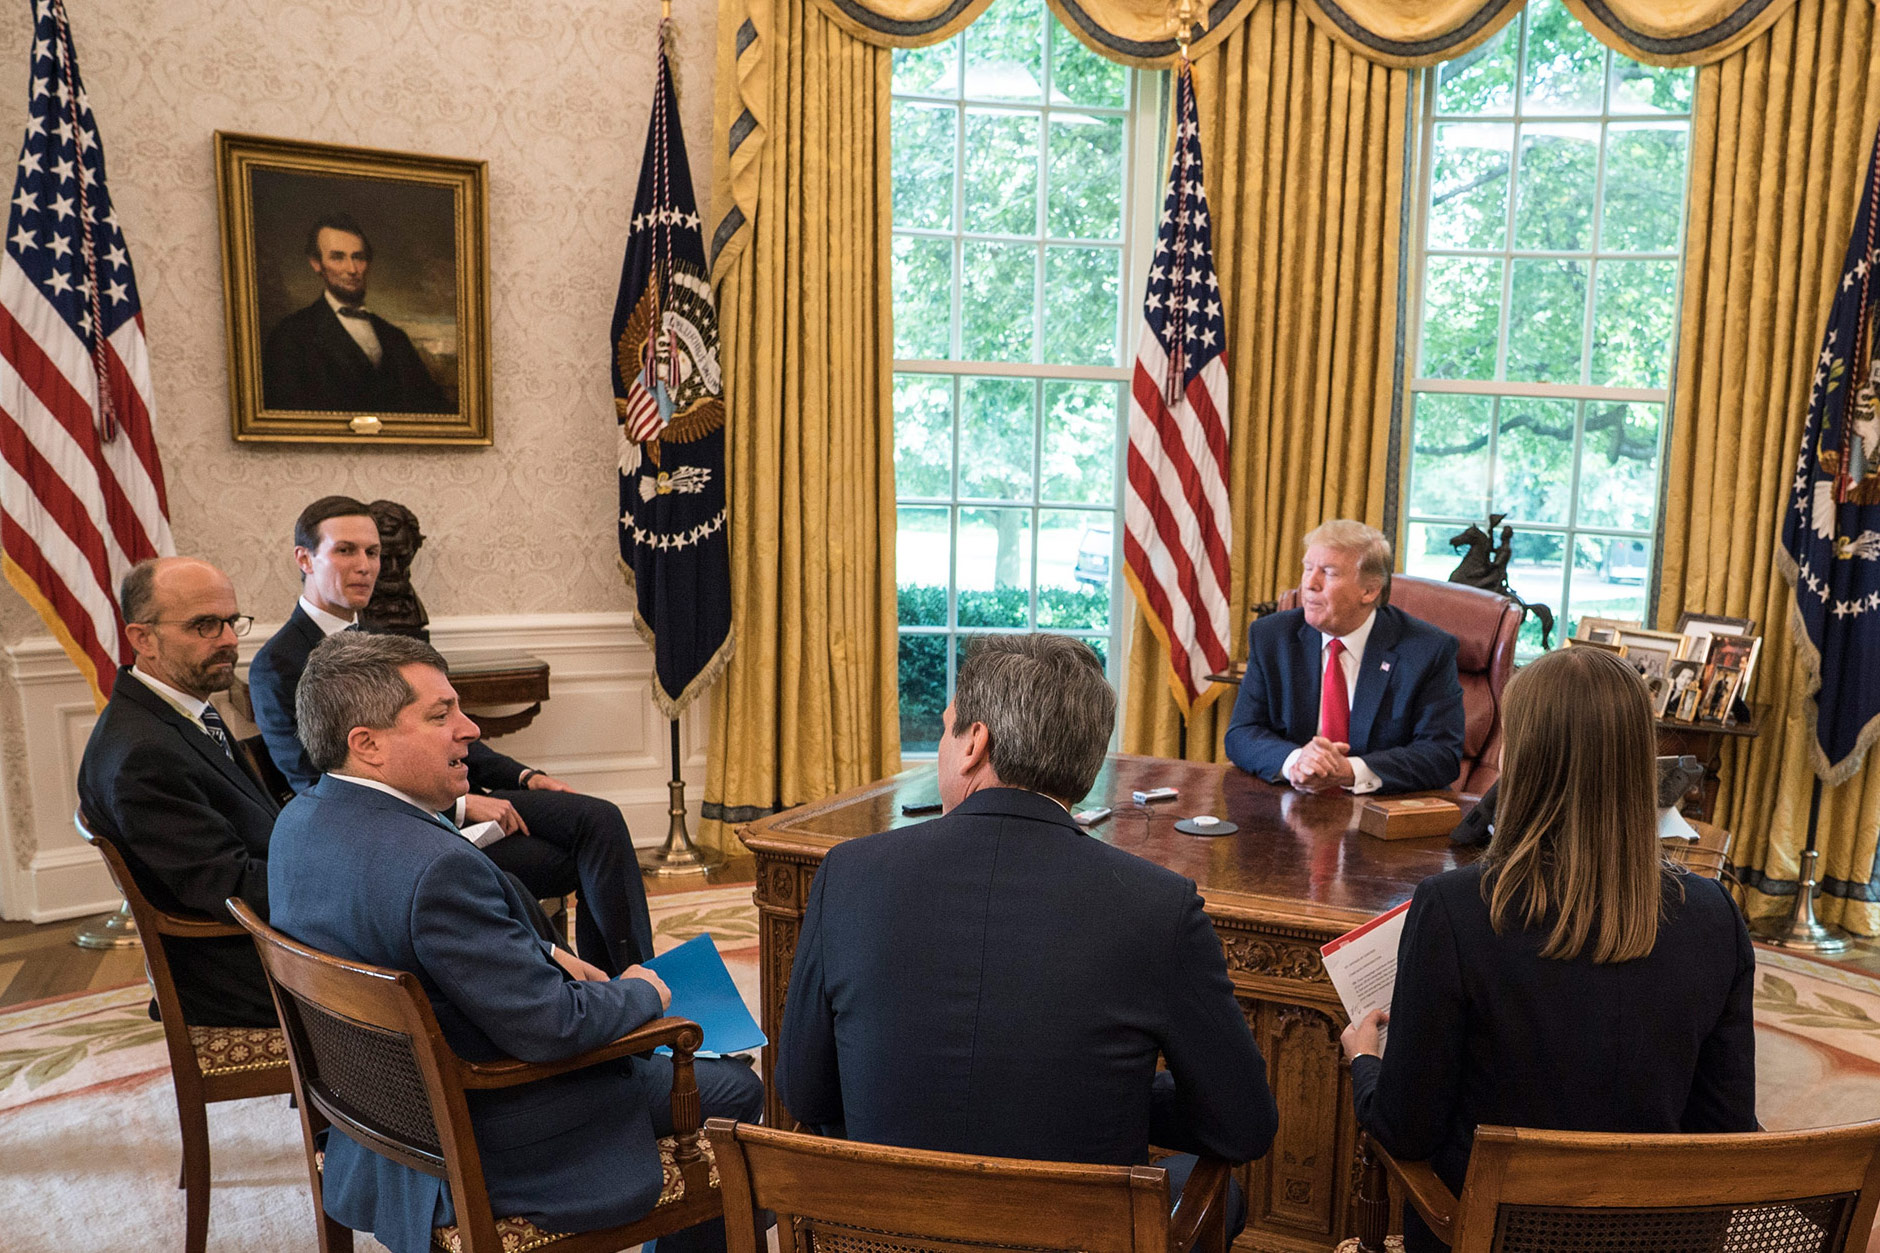 The TIME team with President Trump and senior adviser Jared Kushner, who left at the start of the interview. (Paul Moakley for TIME)